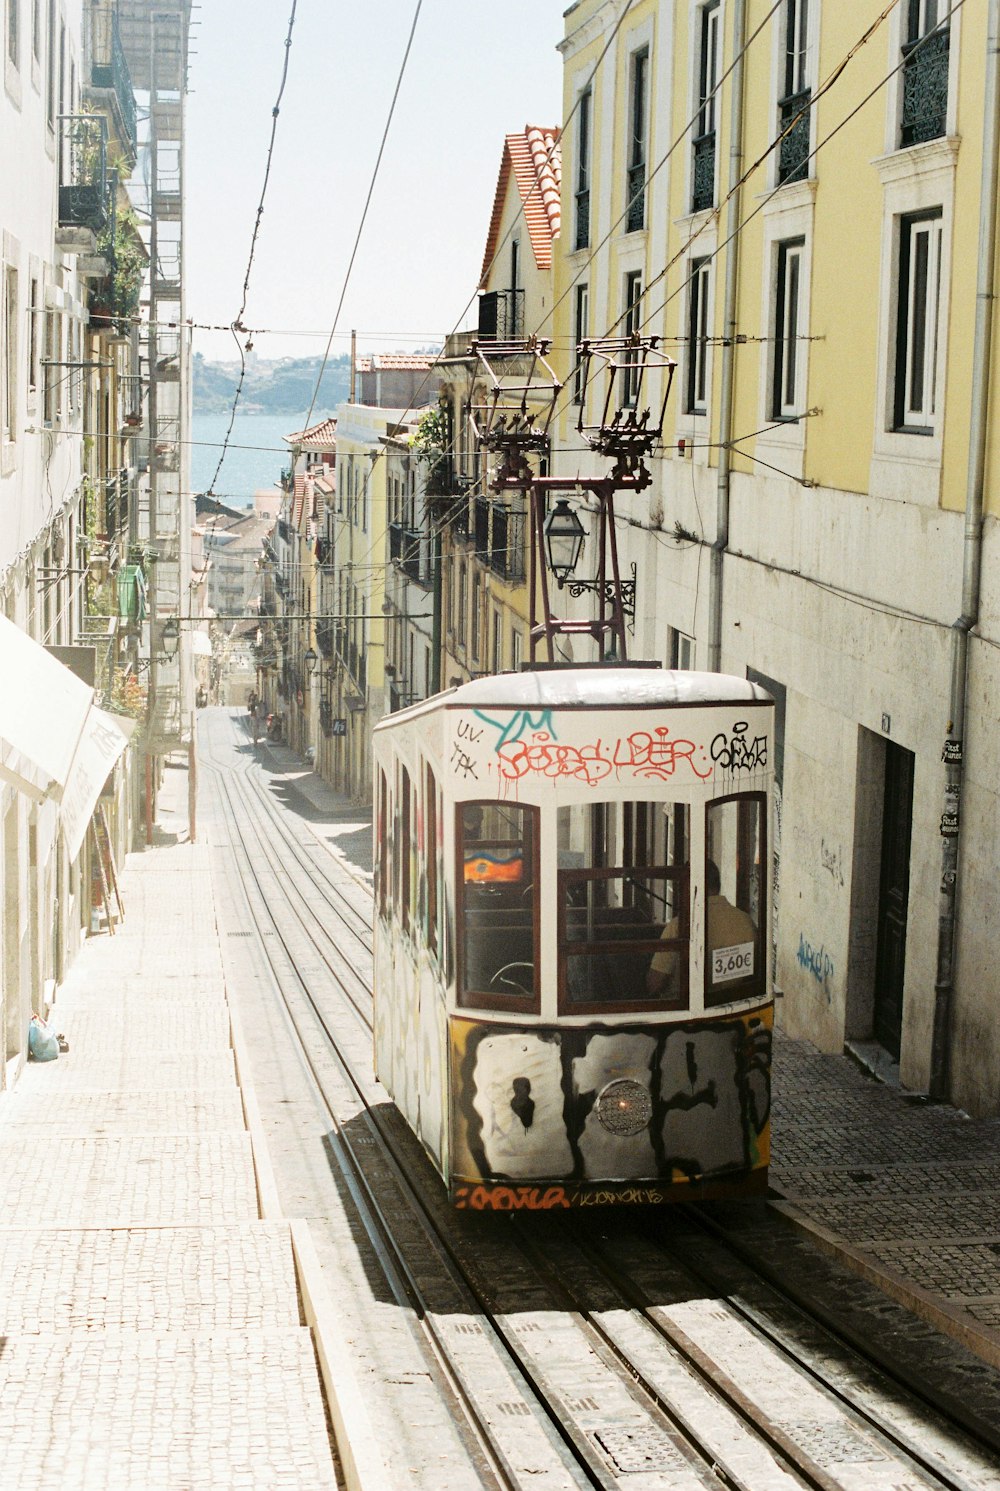 white and brown tram on street during daytime